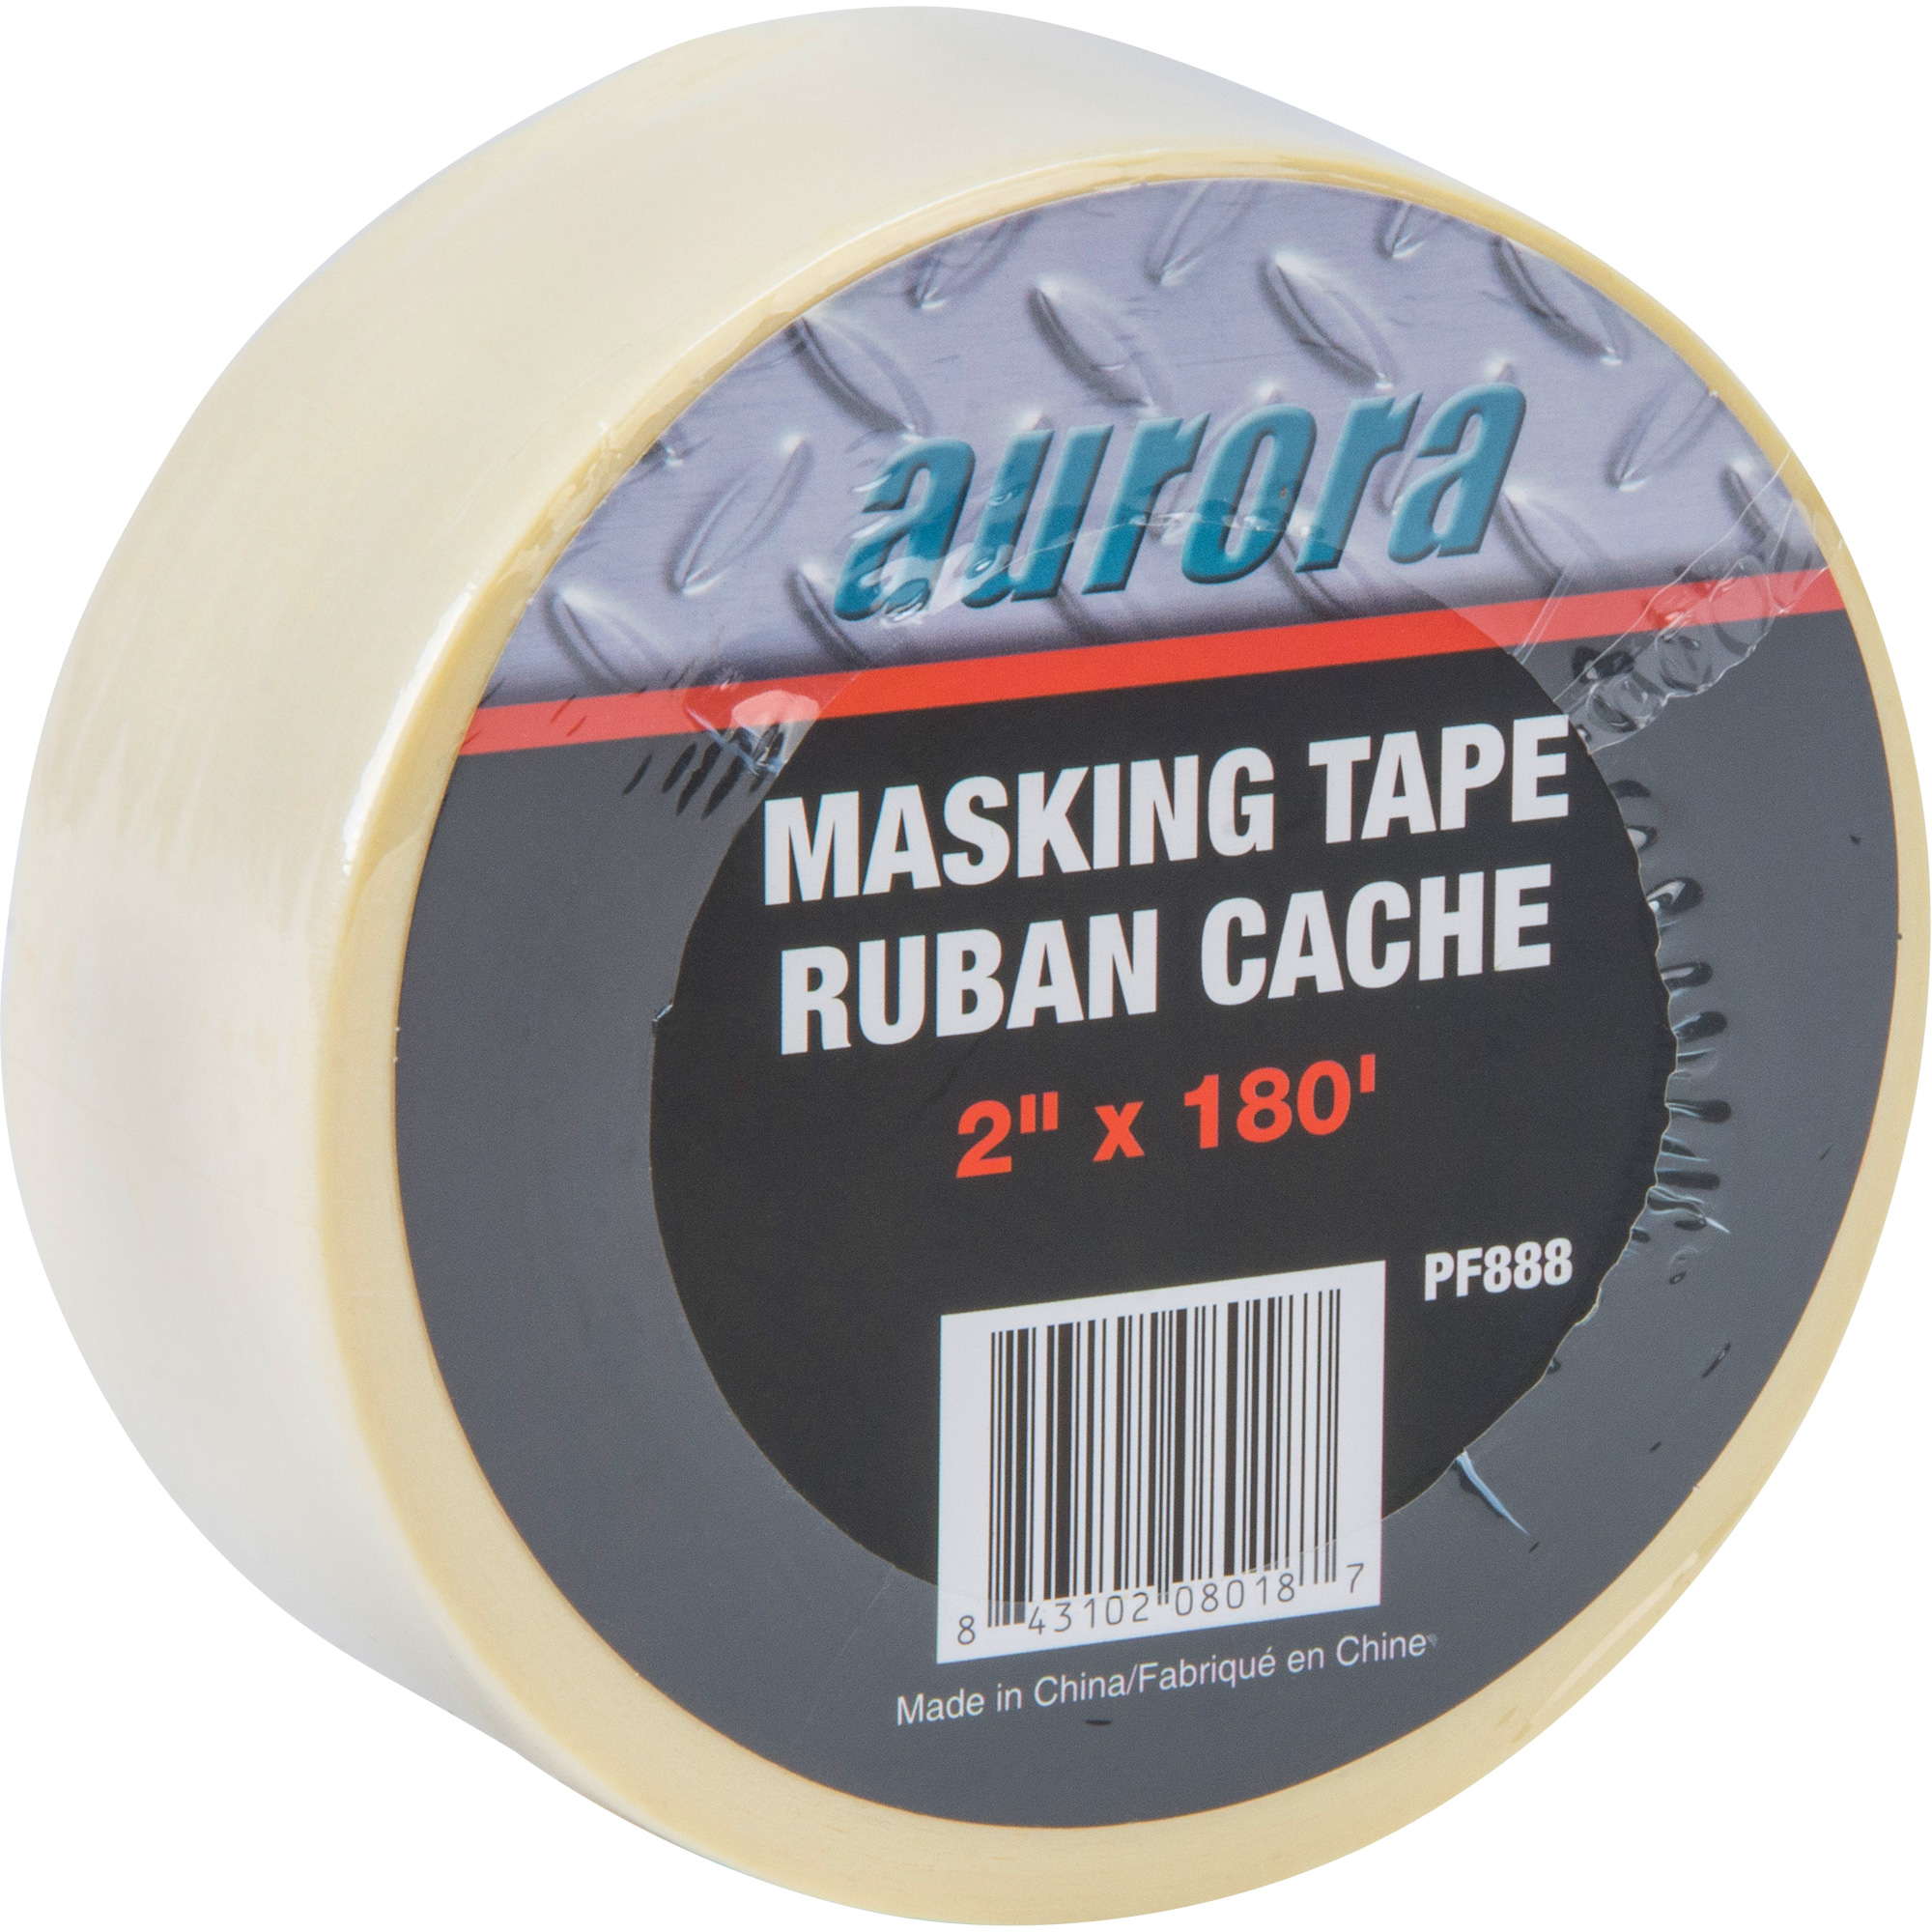 Rolls Tape and Drape and Masking Tape Sets Includes Assorted Sizes Pain - 5